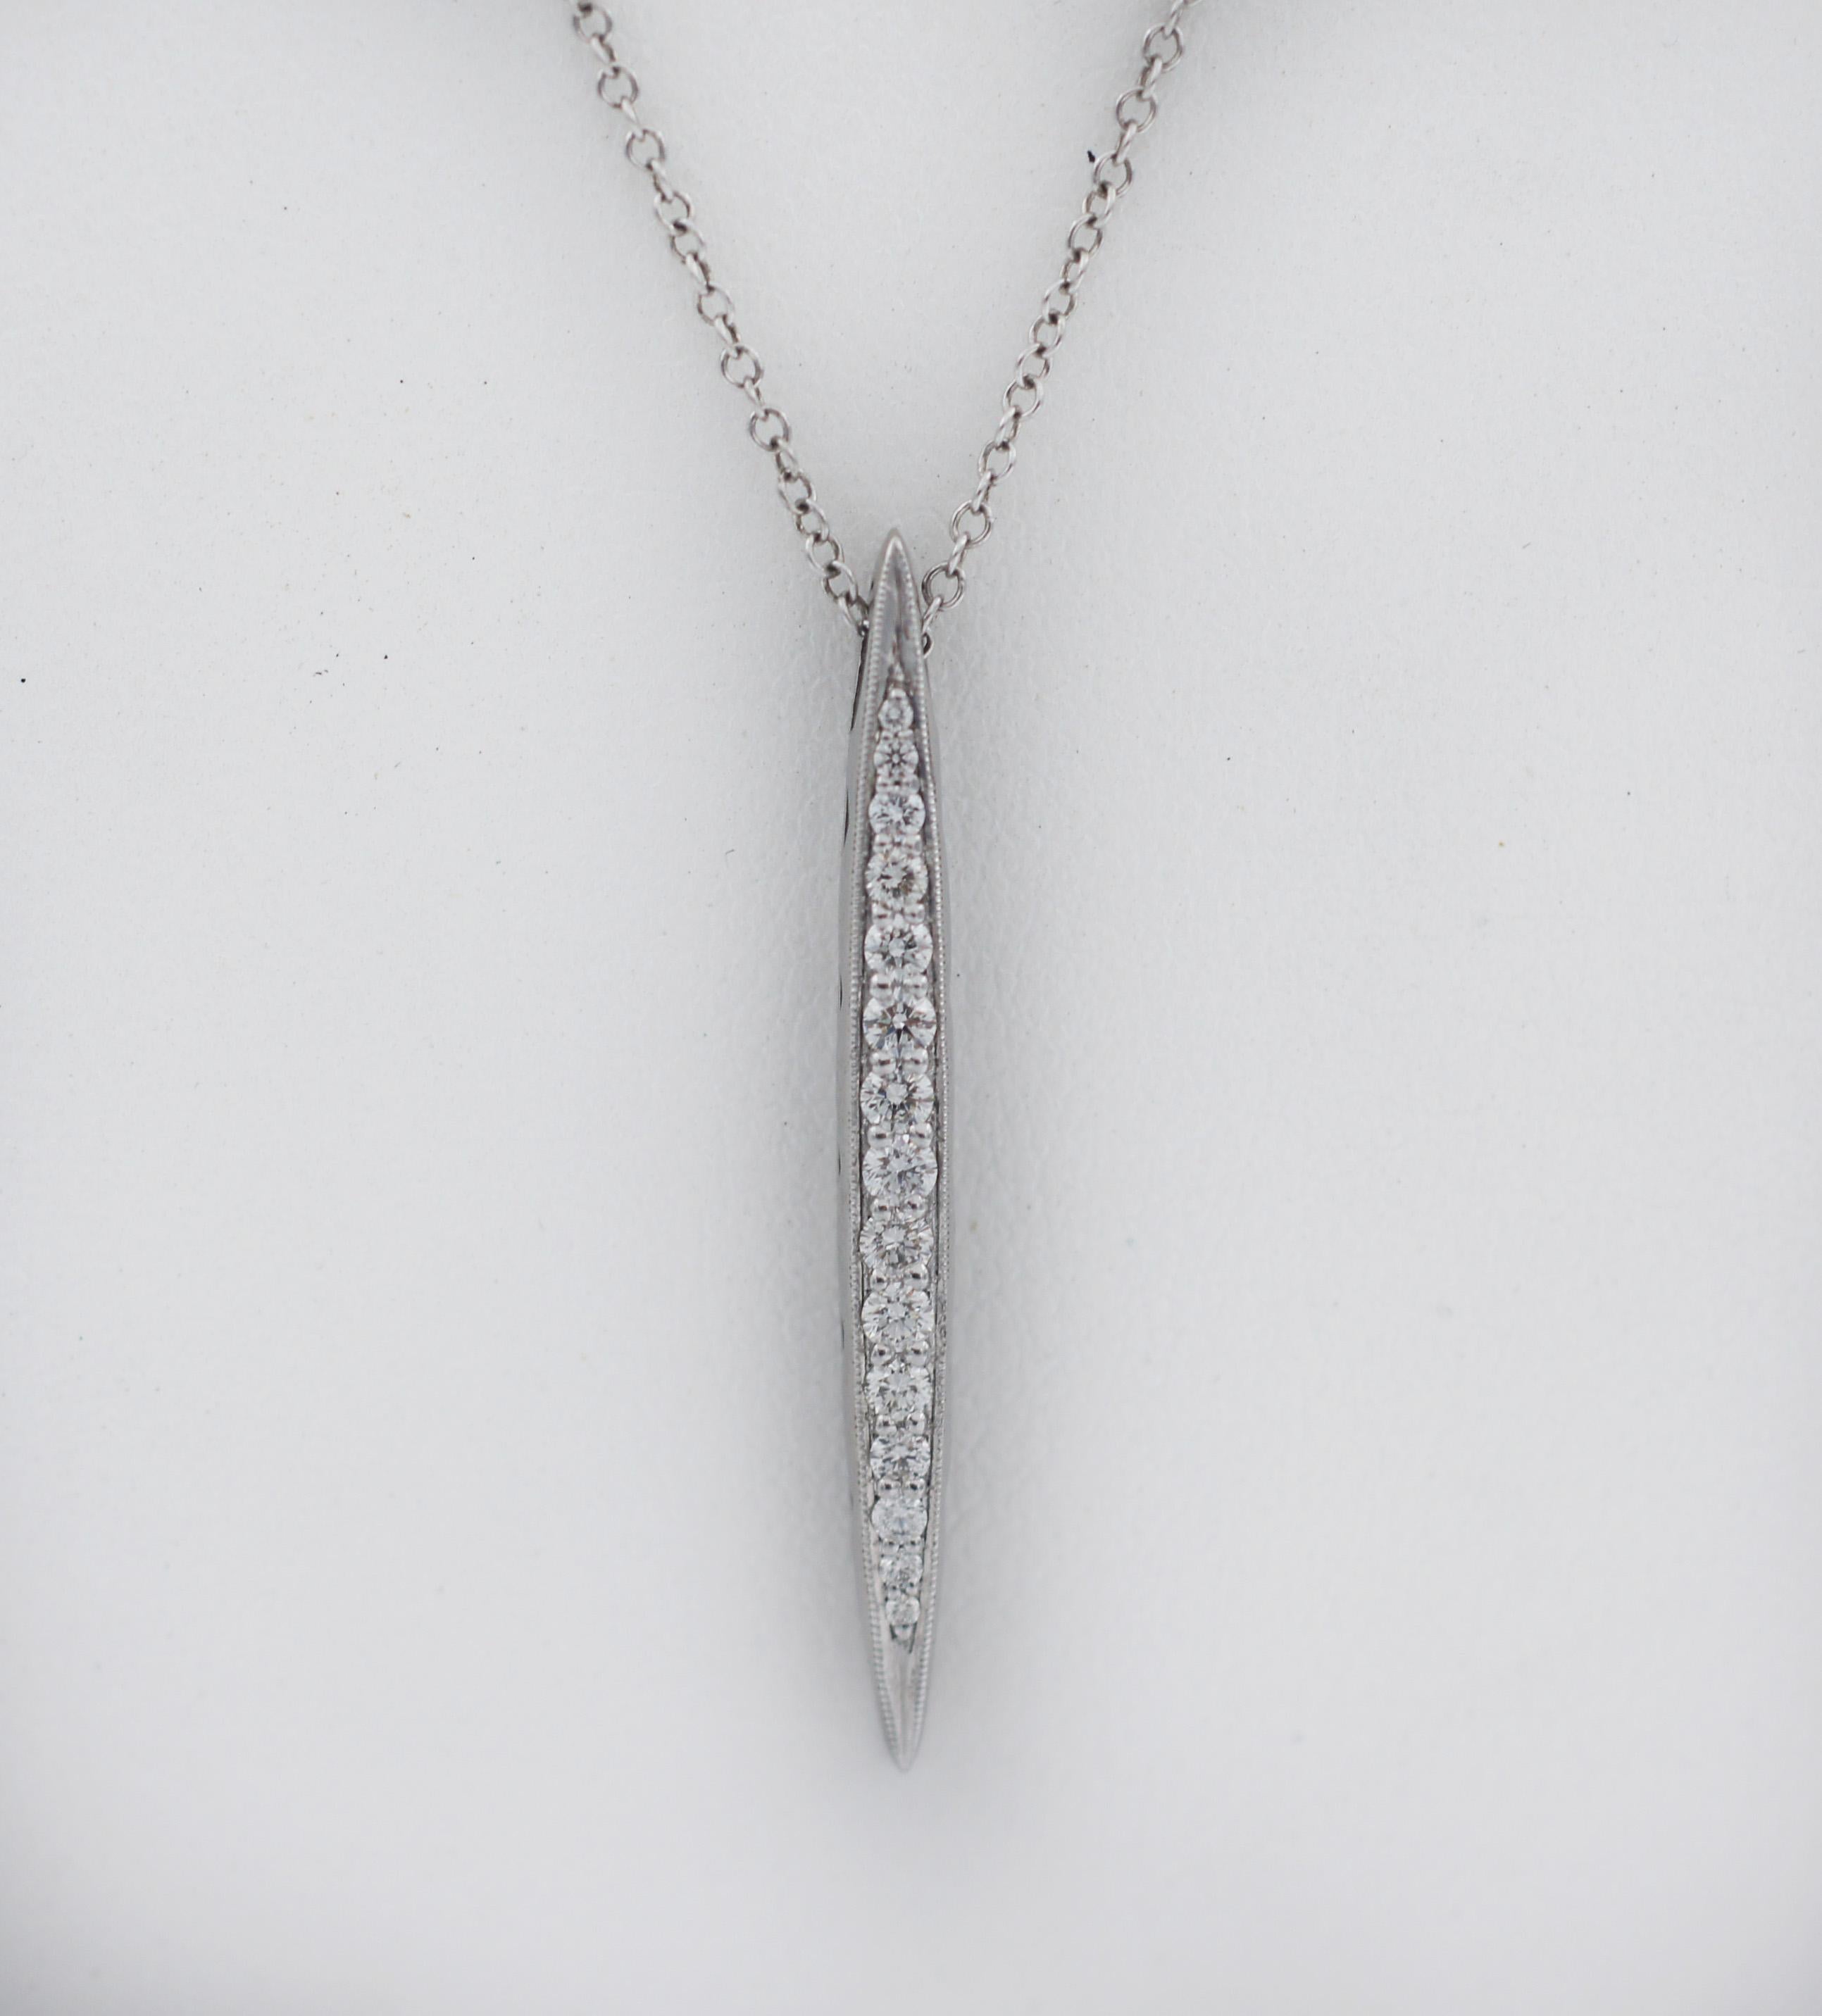 The Ivy Lane
Surfboard Pendant in Silver
Style # SN192
For the Tacori Girl looking to exude timeless elegance and modern edge all at the same time. A truly luxurious string of diamonds that will elevate your daytime look.
Pendant: 1.5 inches